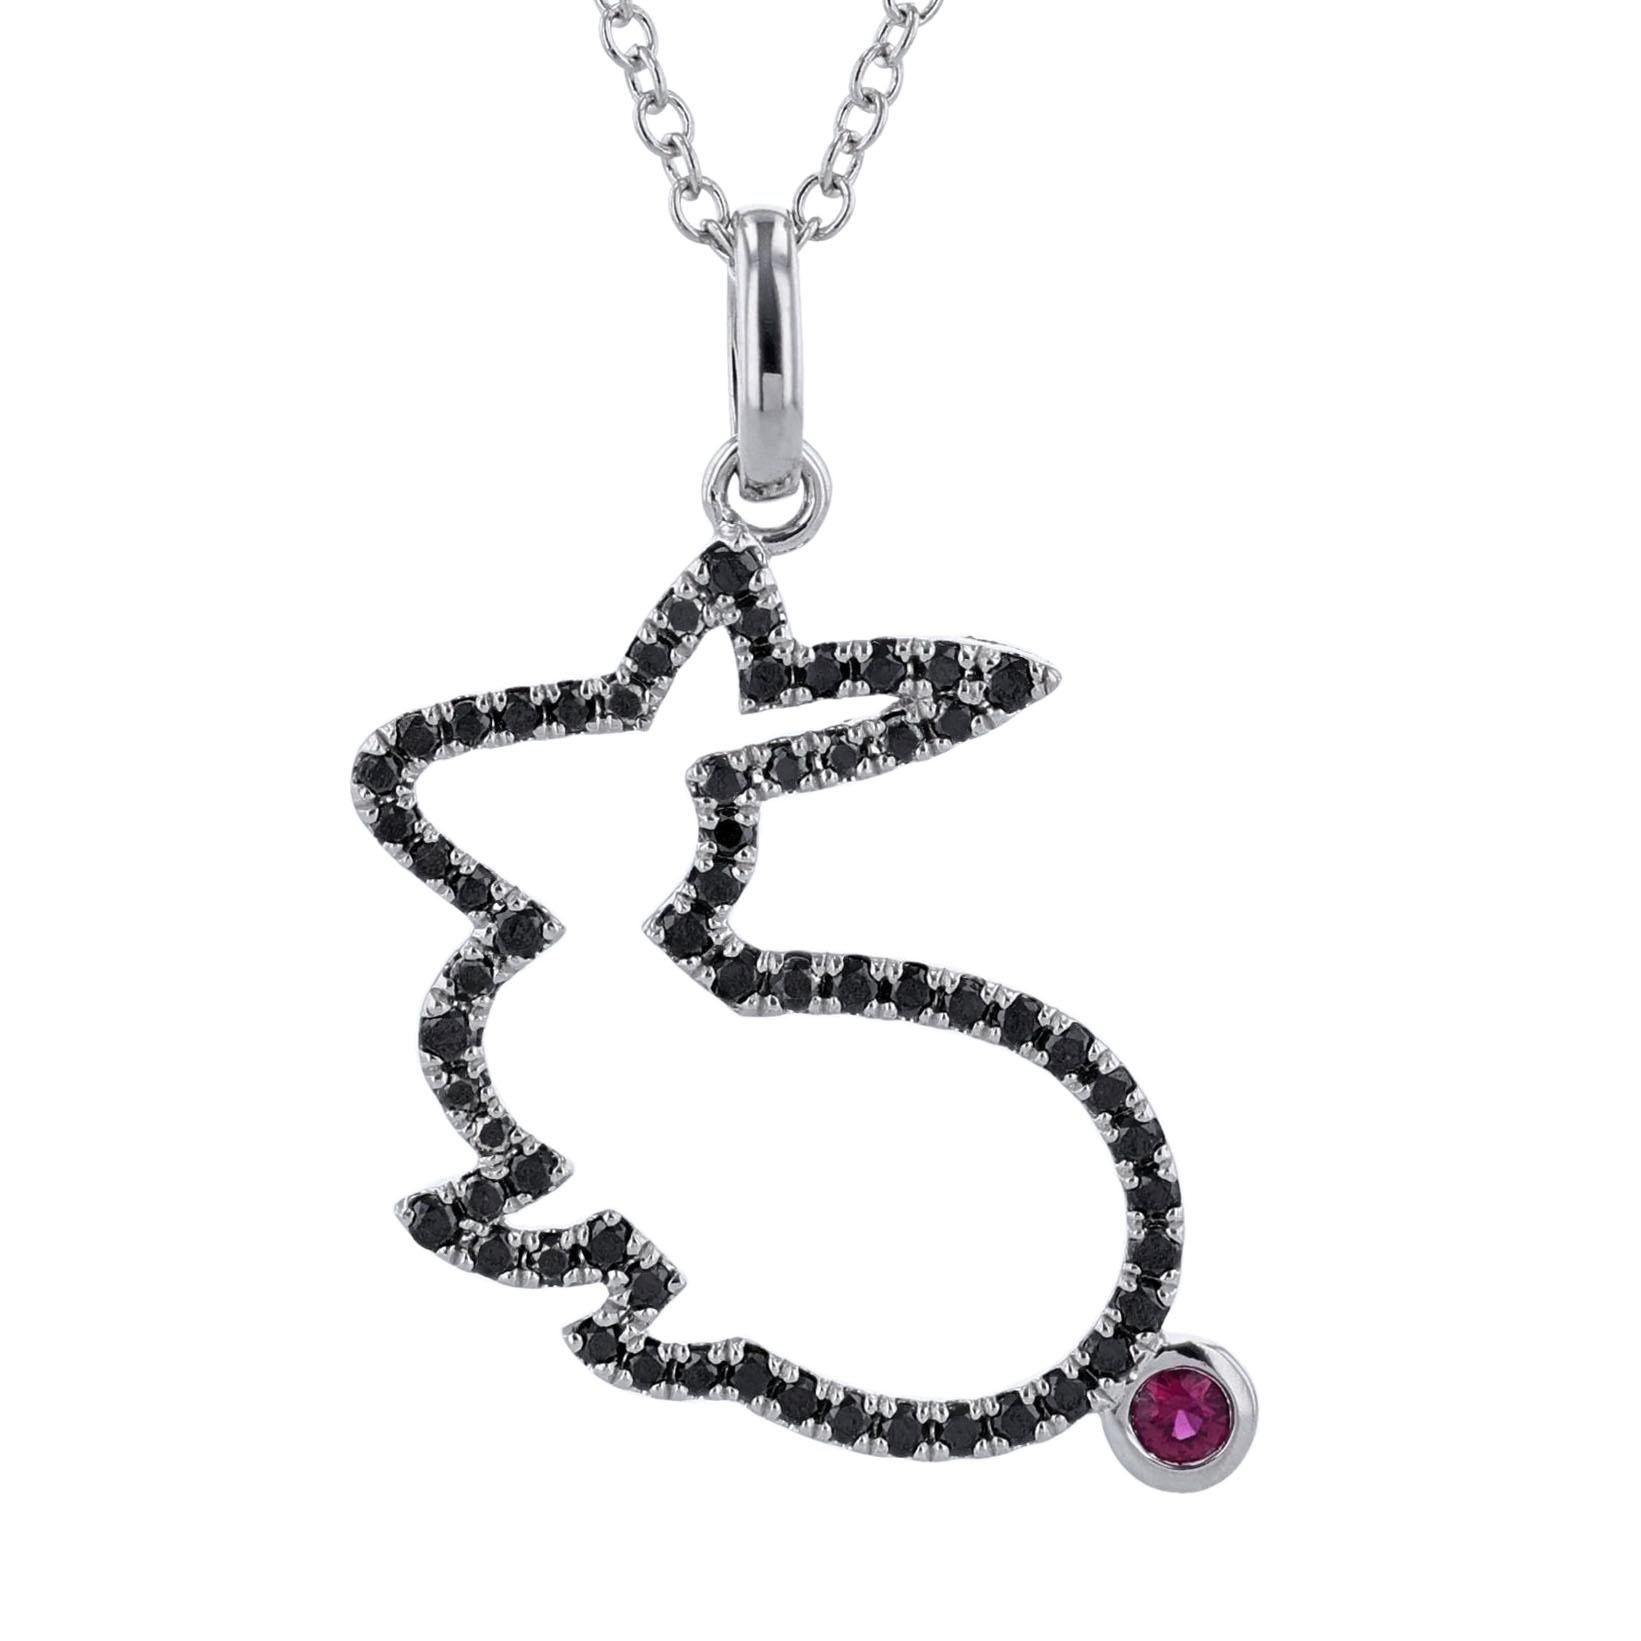 This cross pendant is made in 18K white gold and features a rabbit shape pendant with 61 round cut, prong set black diamonds. With a round cut, bezel set 0.05ct ruby and a white gold carrot charm that includes 1 bezel set, 0.32ct. white diamond.